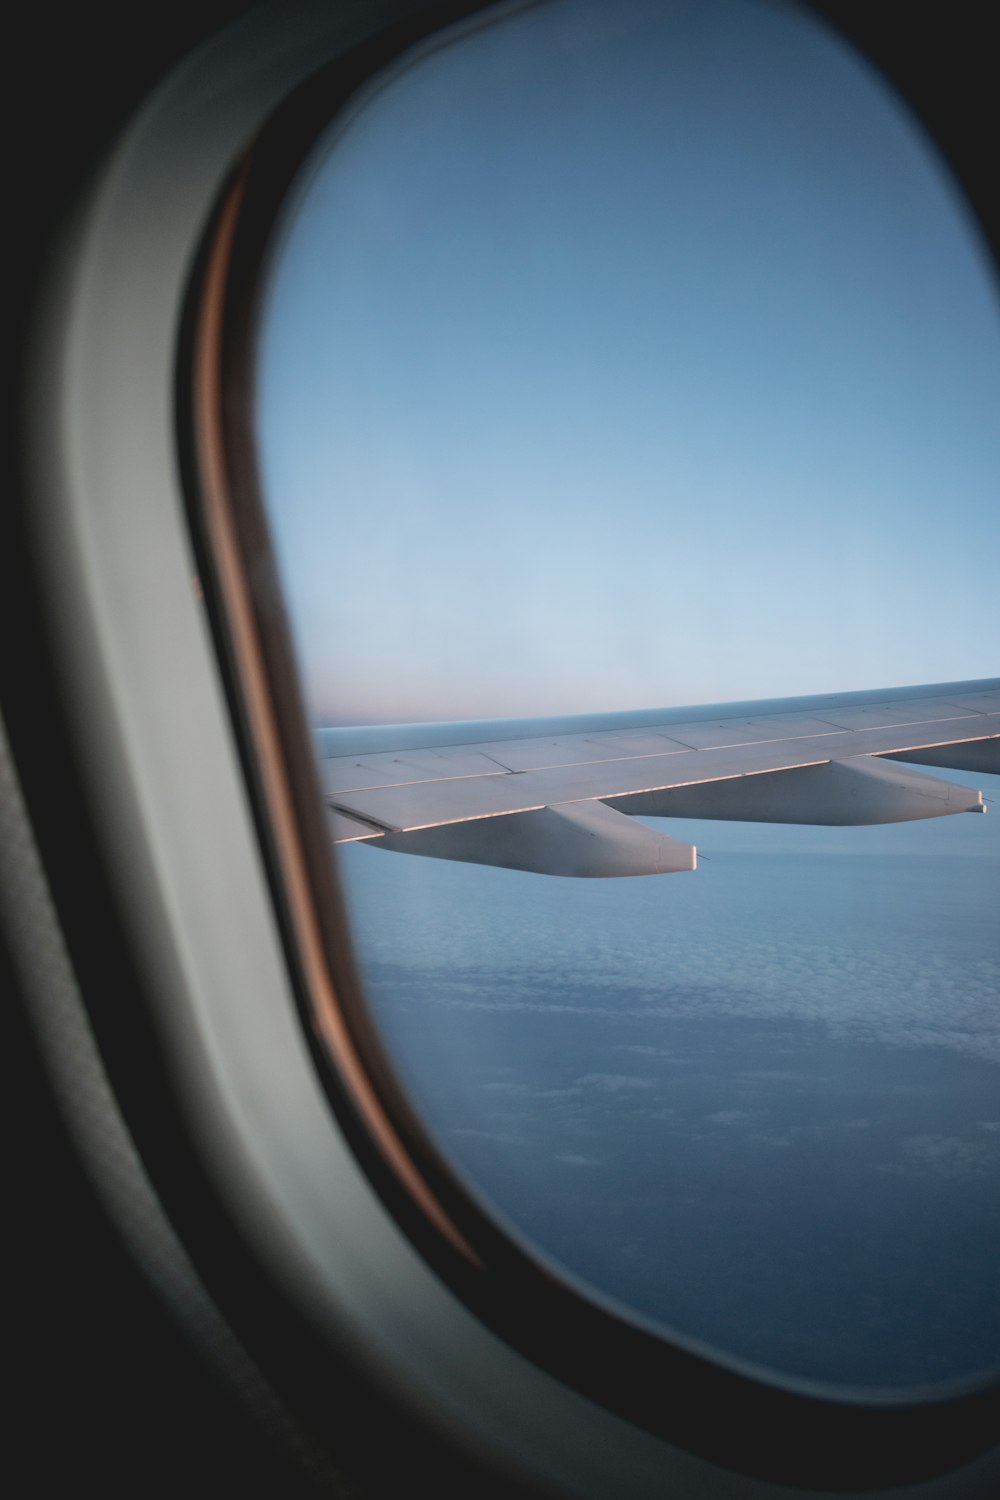 a view of the wing of an airplane as it flies over the ocean